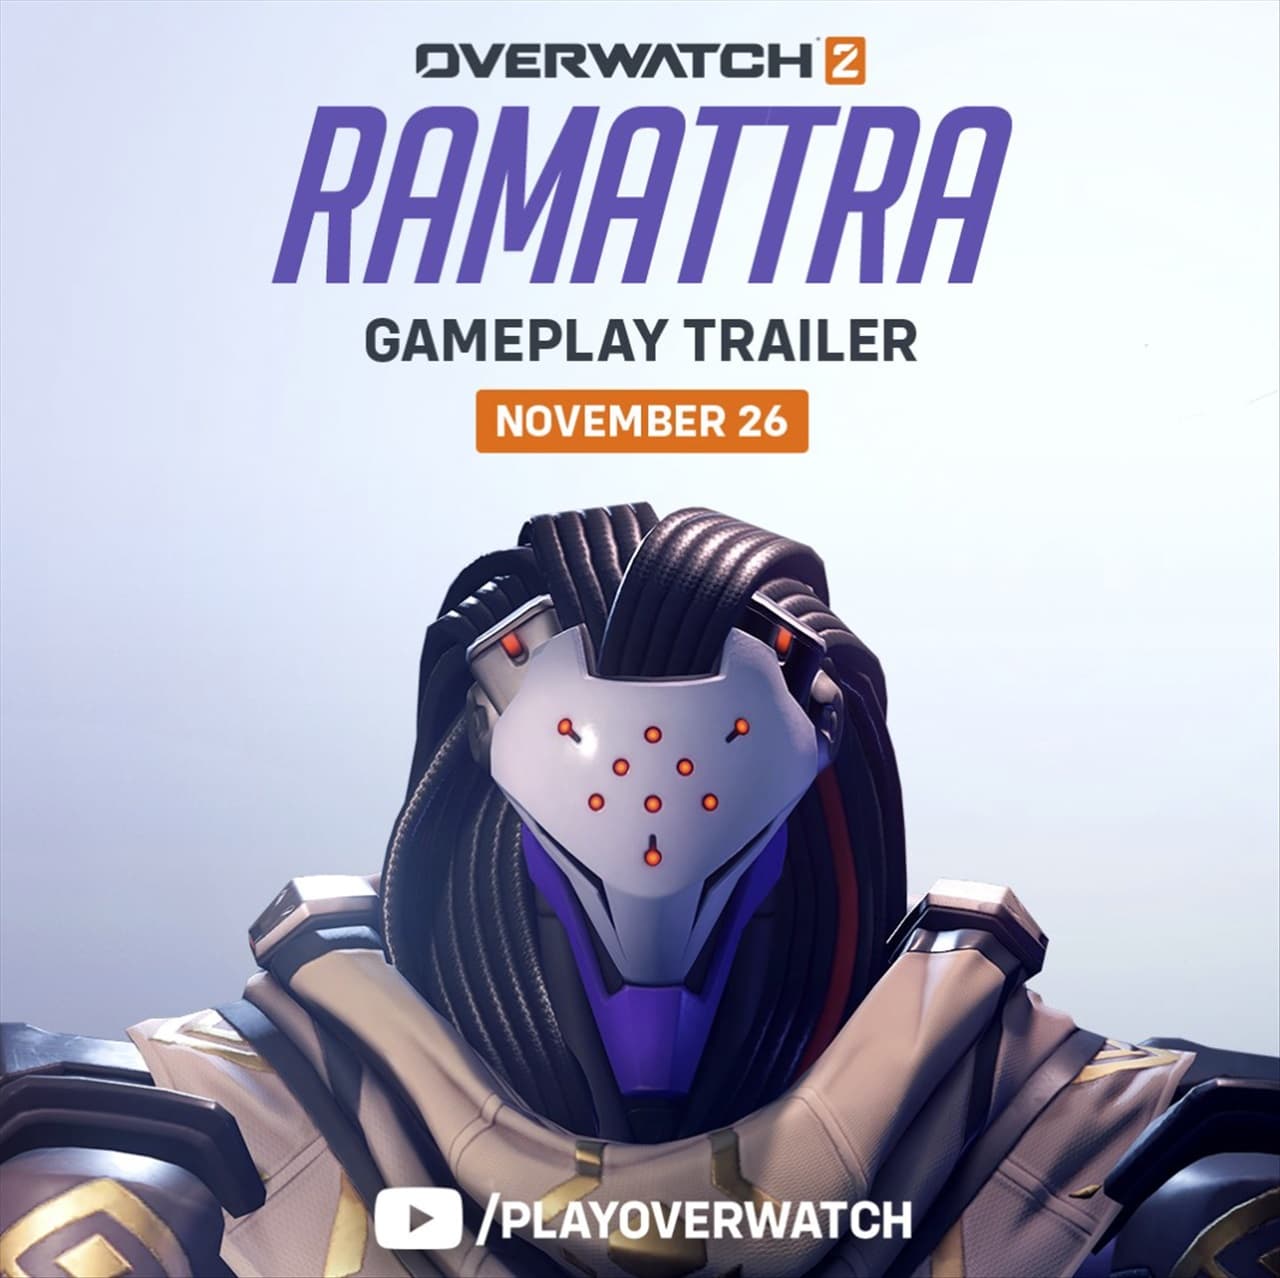 Overwatch 2 Ramattra’s gameplay trailer is coming this weekend